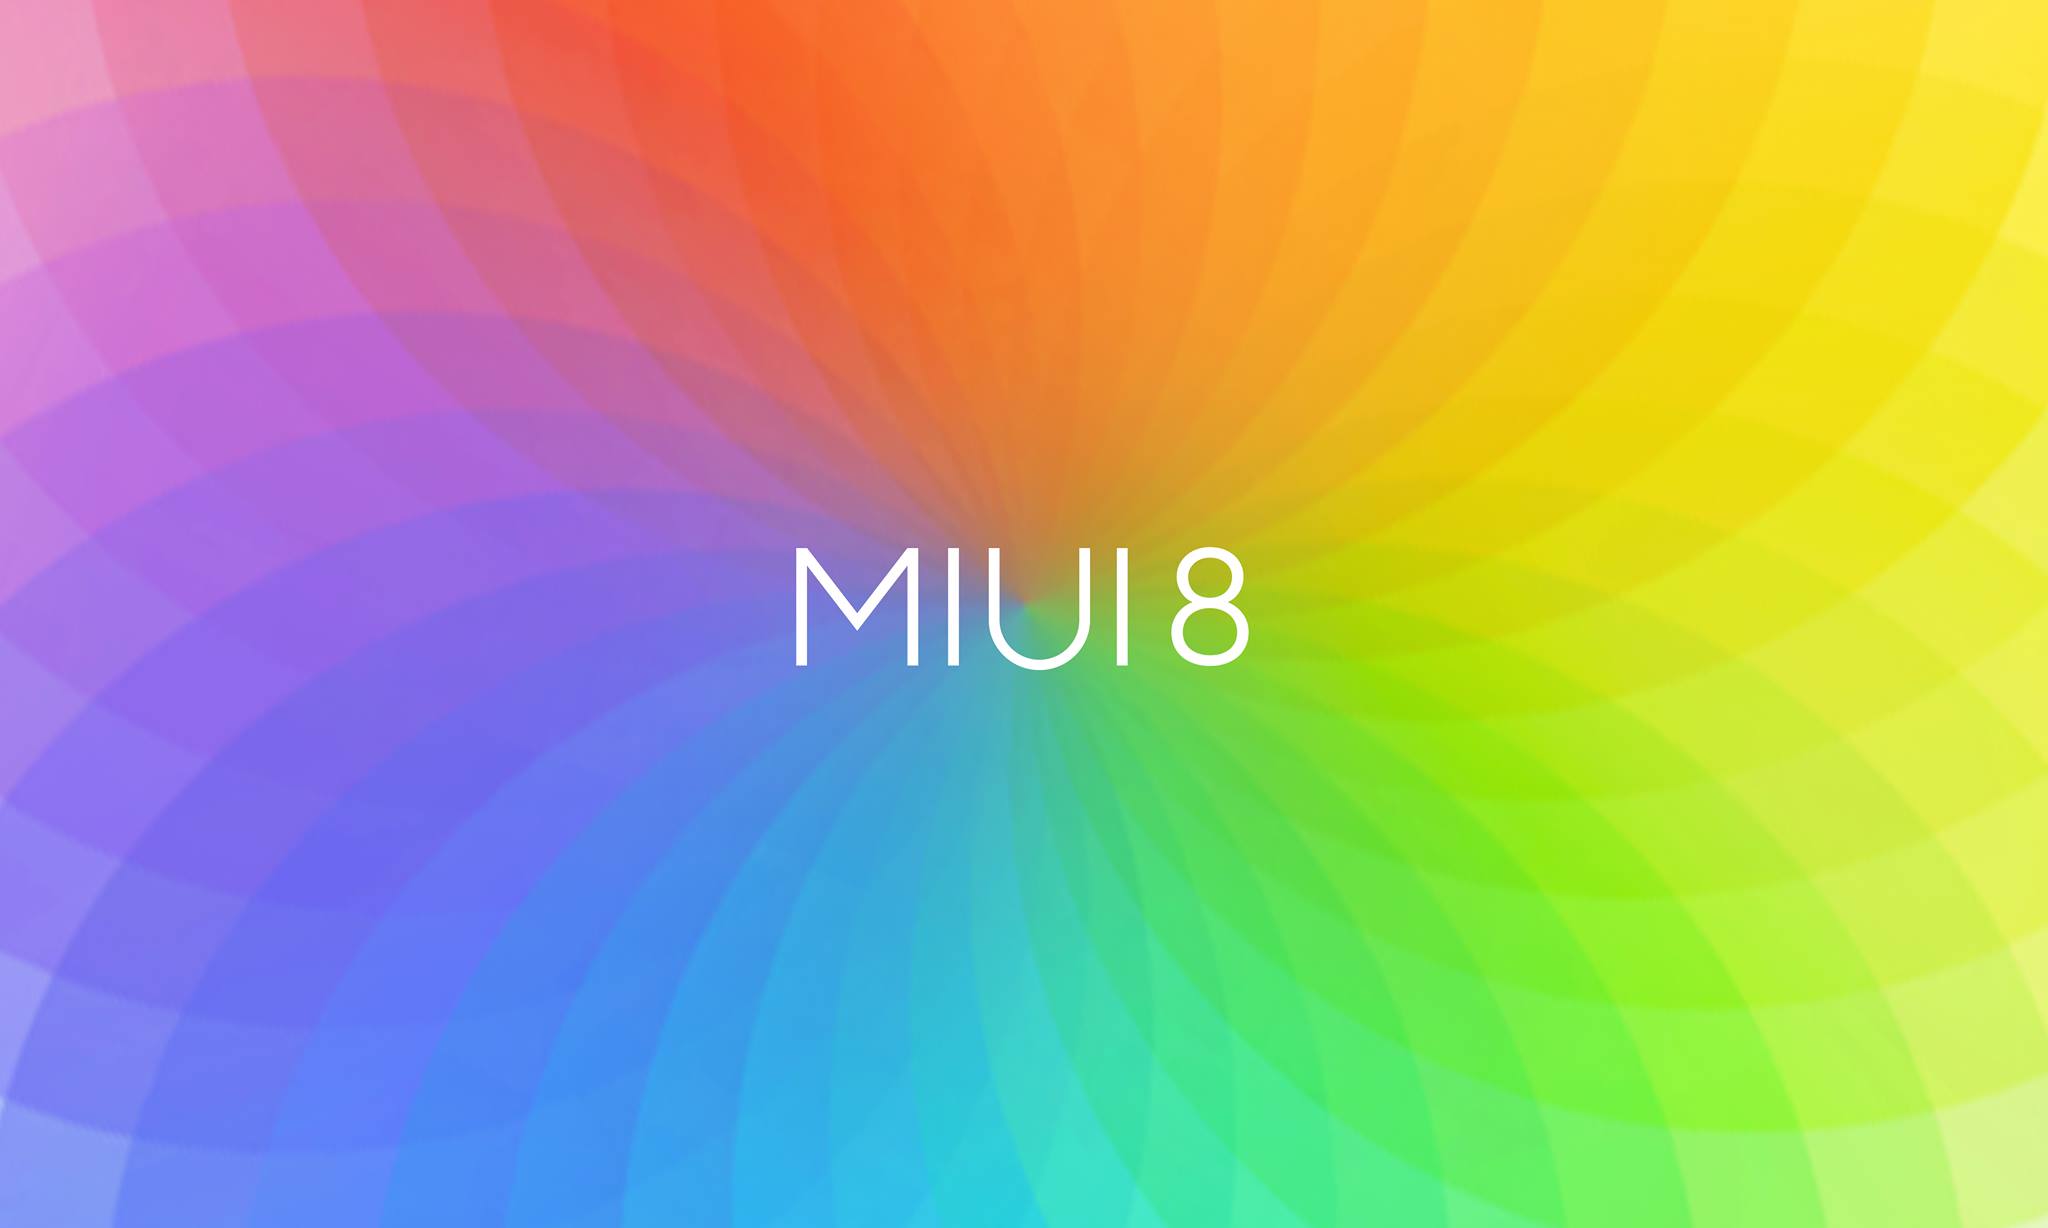 Miui Miui 8 Global Stable Rom V8 0 4 0 Mbgmidi For Mi 5s Plus Released For Public Download Here T Co Saciyqlbja T Co Wqsz1jfawy